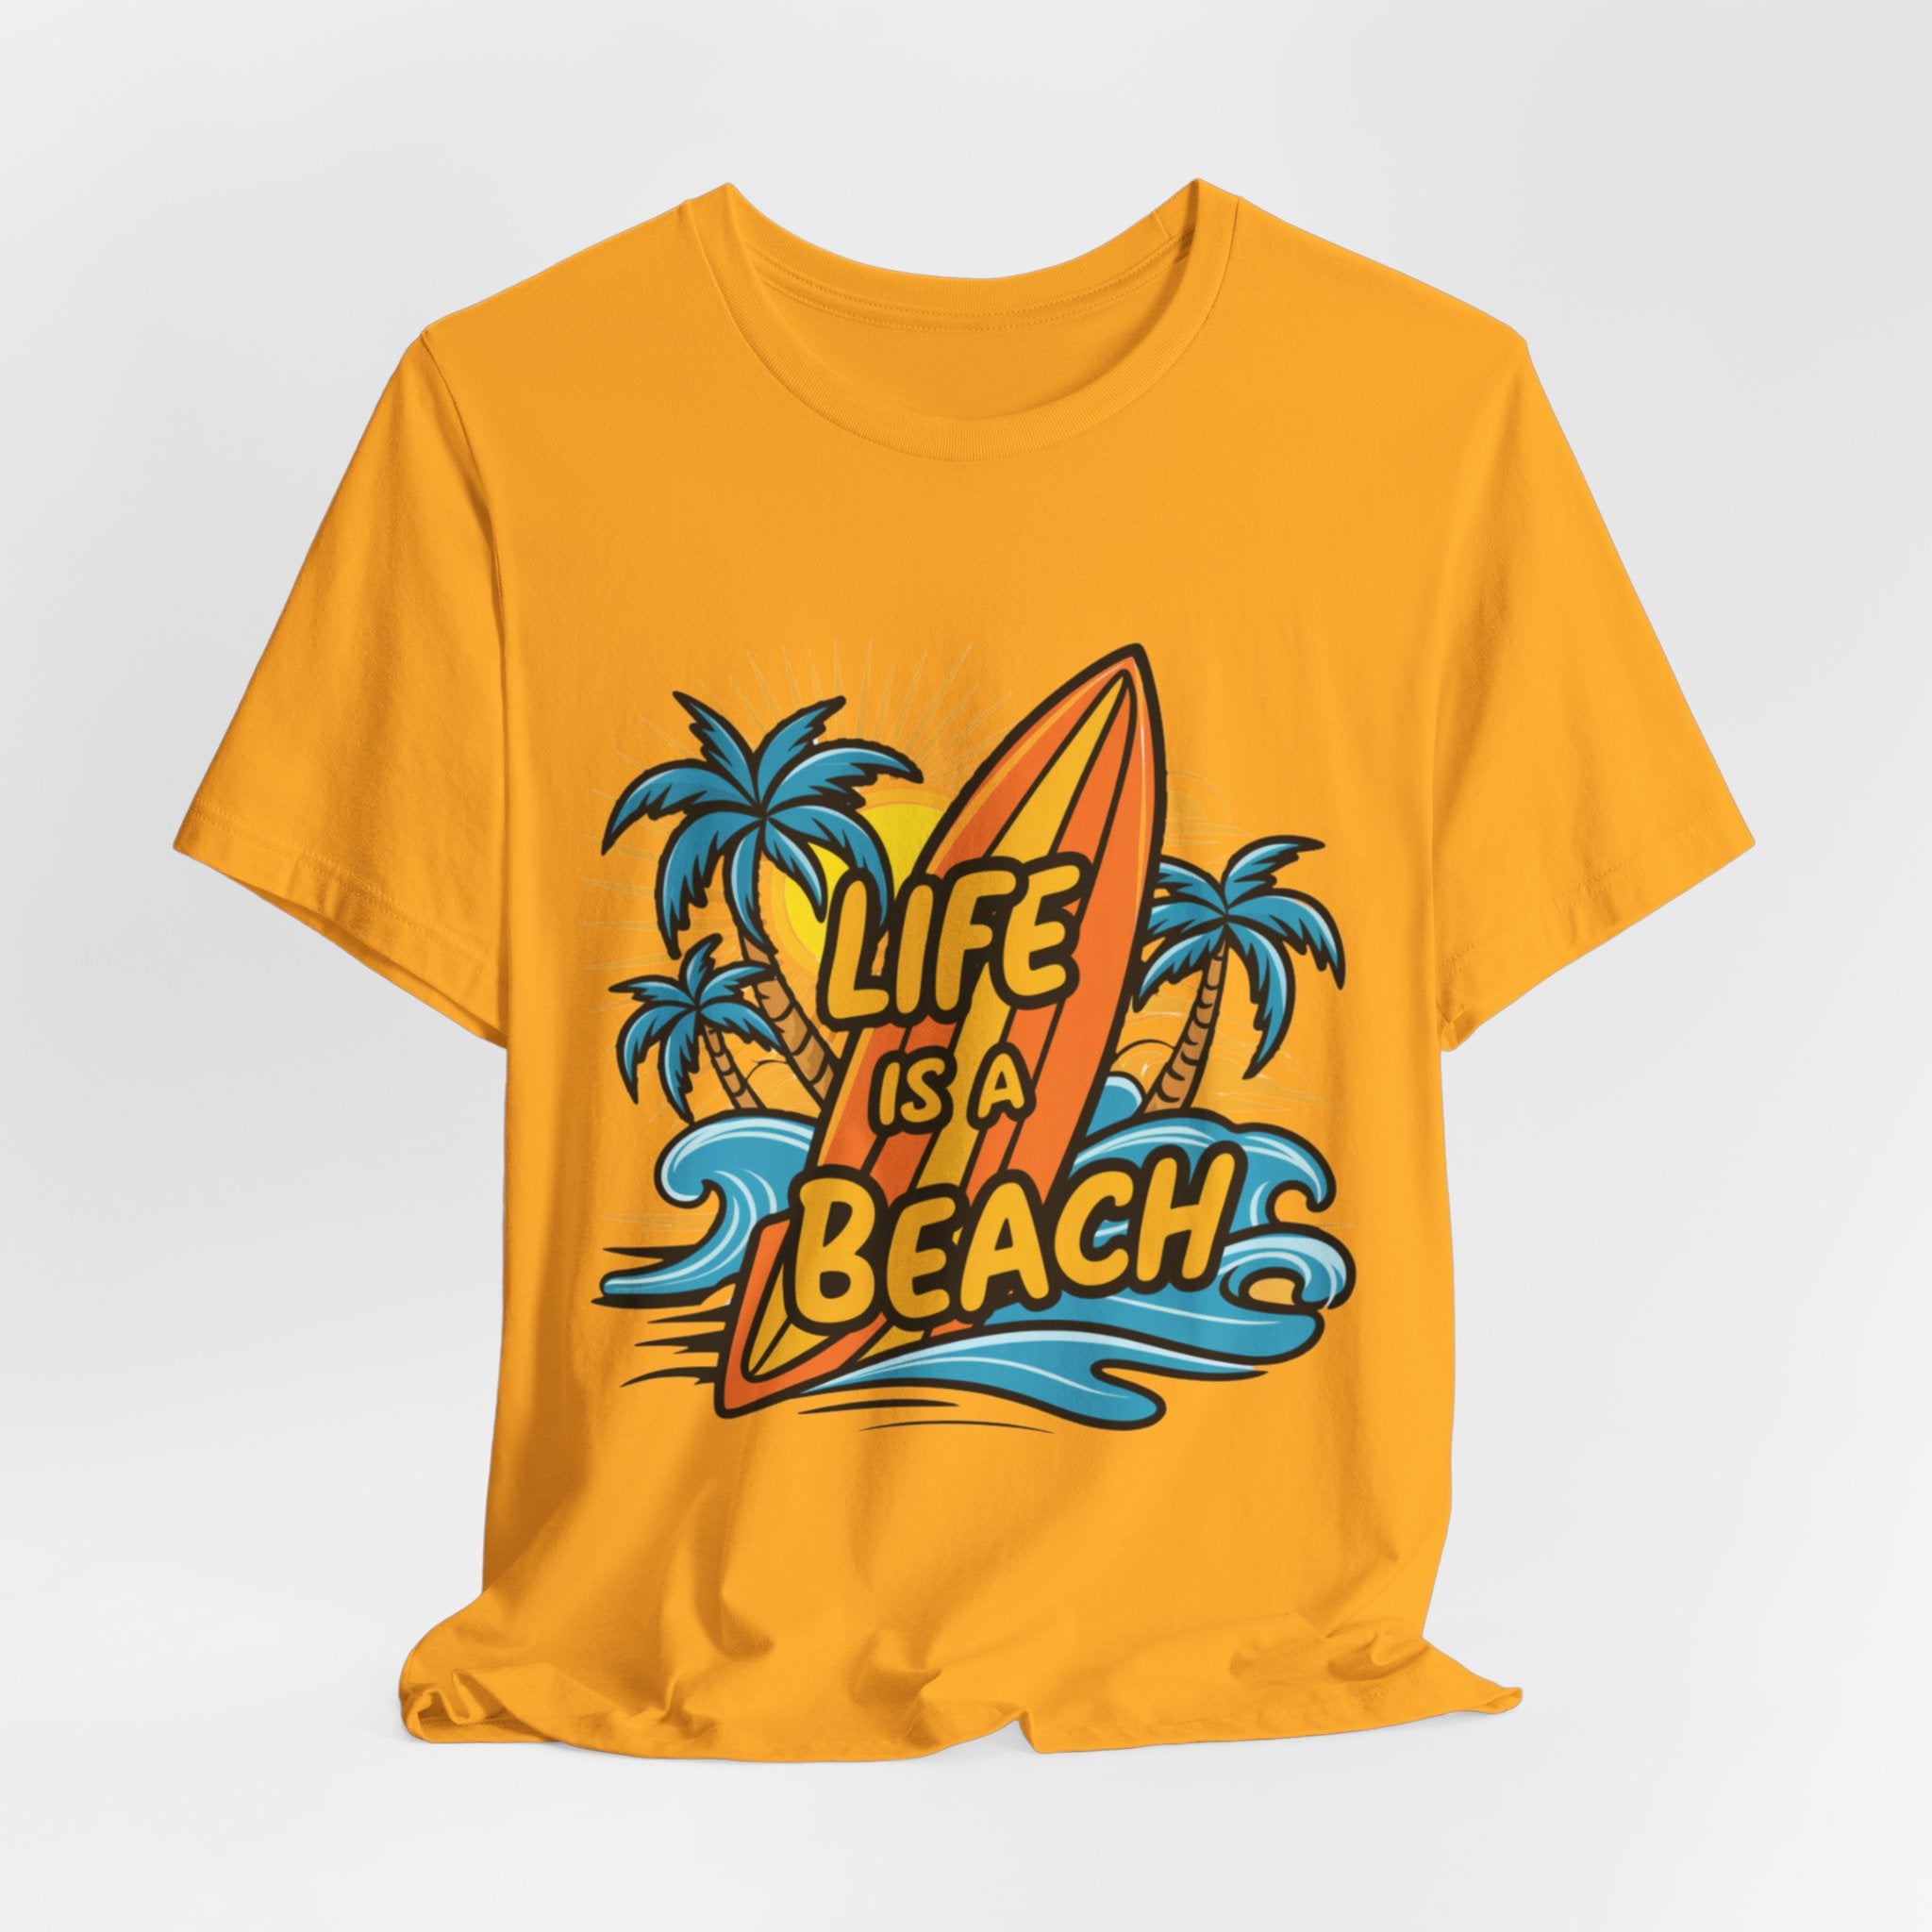 Surfboard and Palm Trees T-Shirt